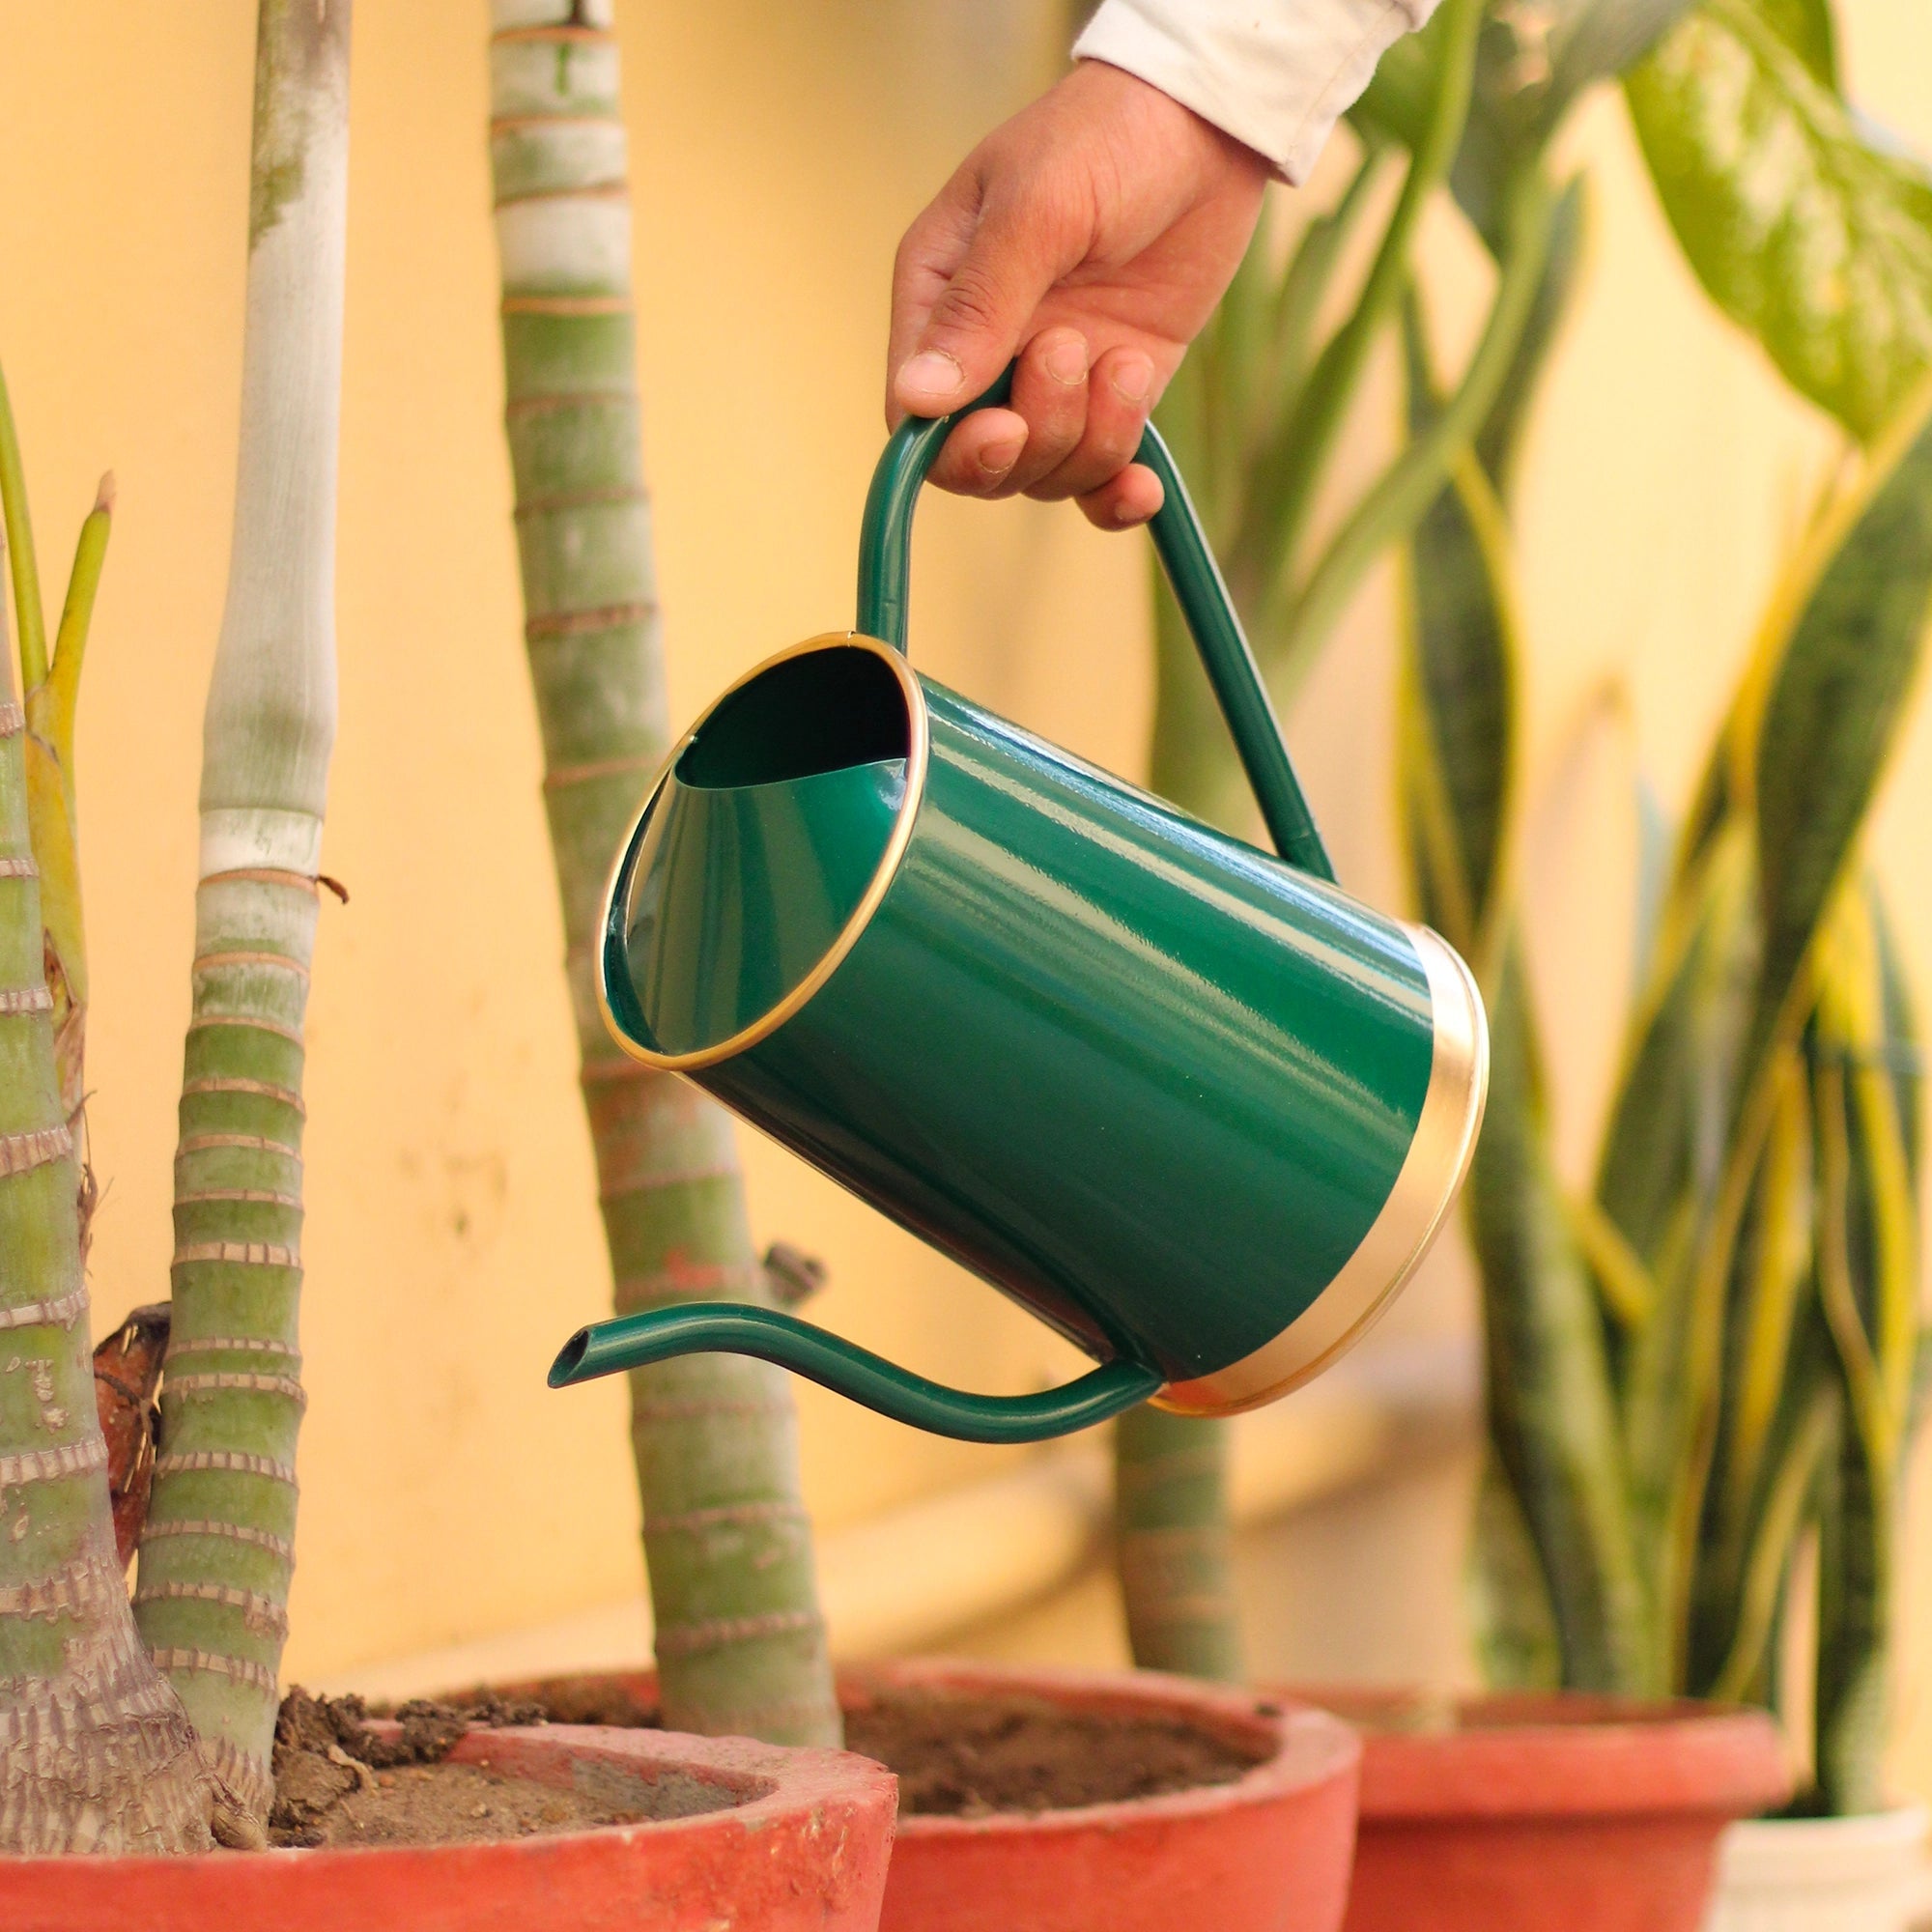 Urban Plant Metal Watering Can for Indoor & Outdoor Use | Best for Home Gardening | Terrace Garden Accessories | Watering Can with Long Spout - 1.5ltr Gardening Accessories Urban Plant Green 